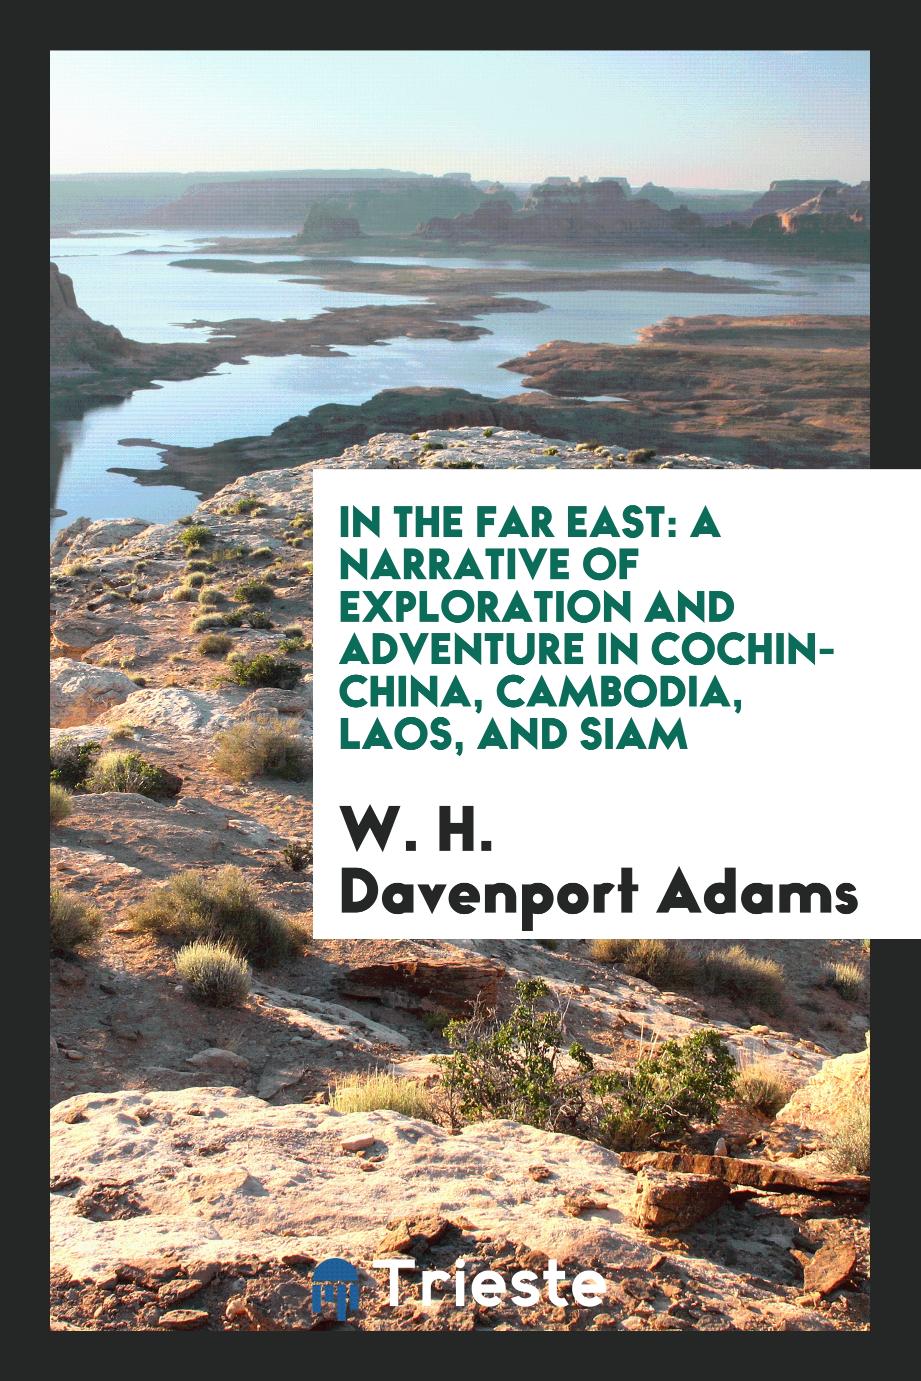 In the Far East: a narrative of exploration and adventure in Cochin-China, Cambodia, Laos, and Siam